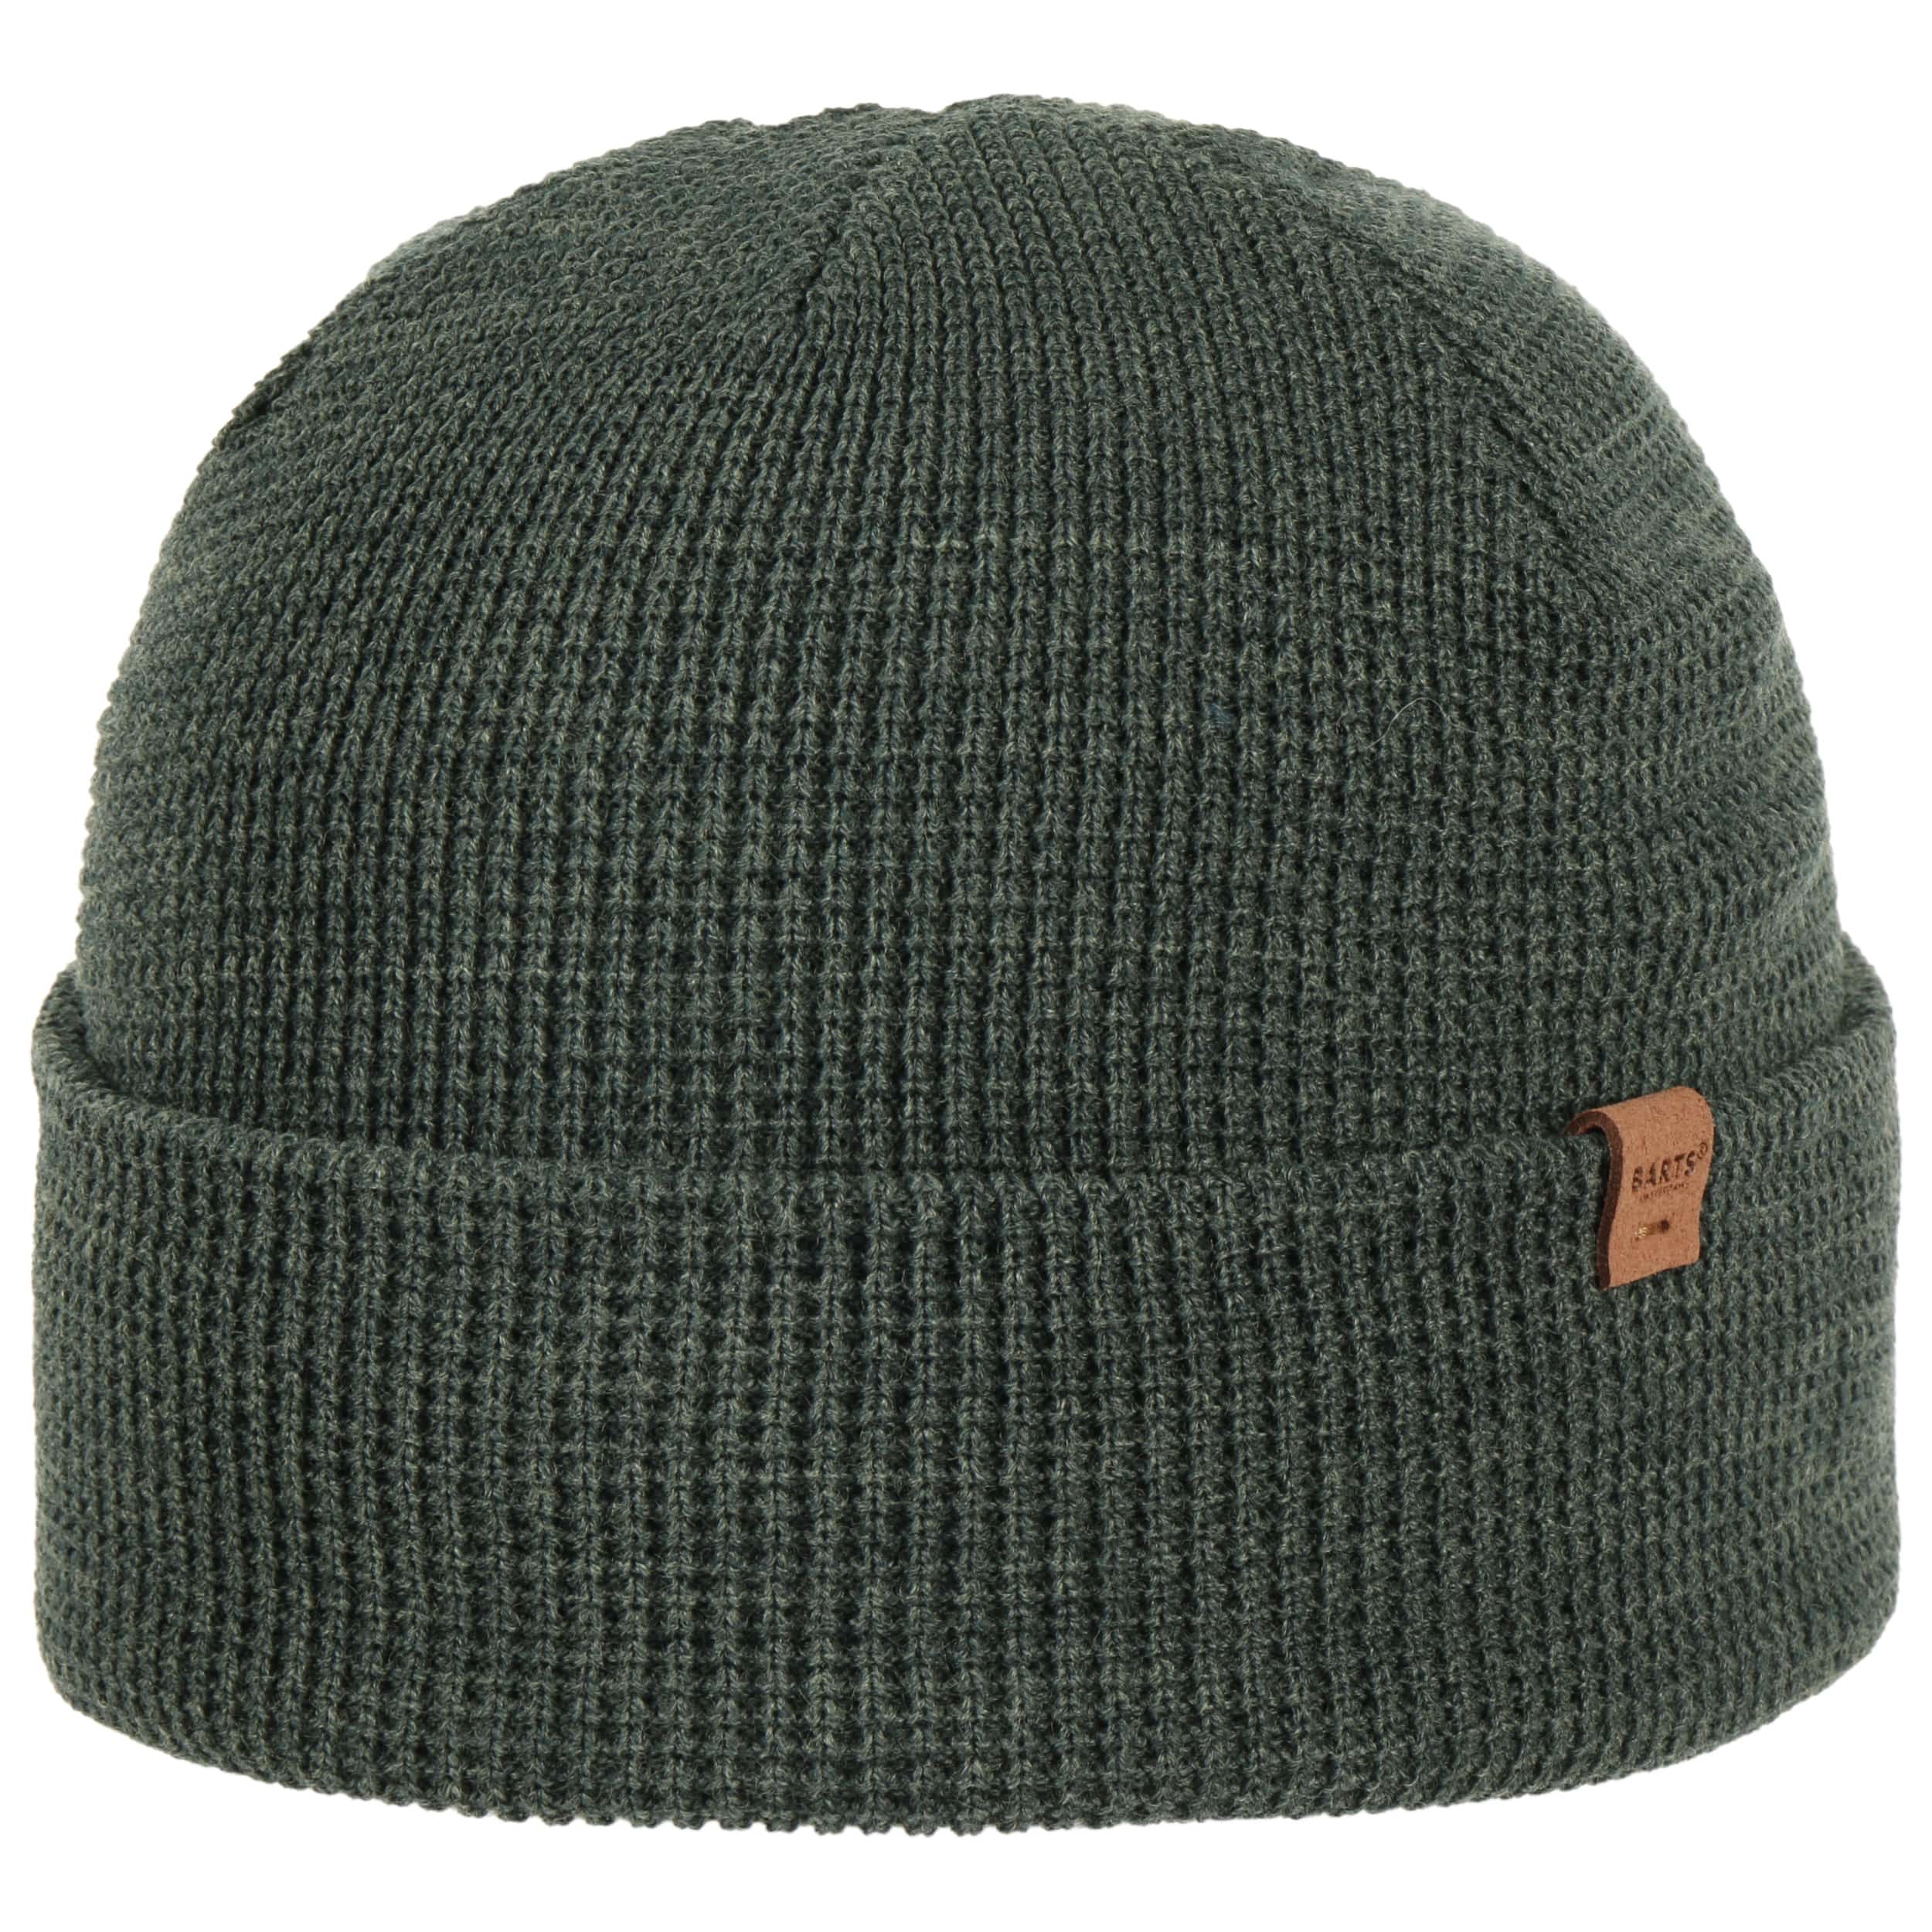 - by Coler Beanie Barts 22,95 £ Hat